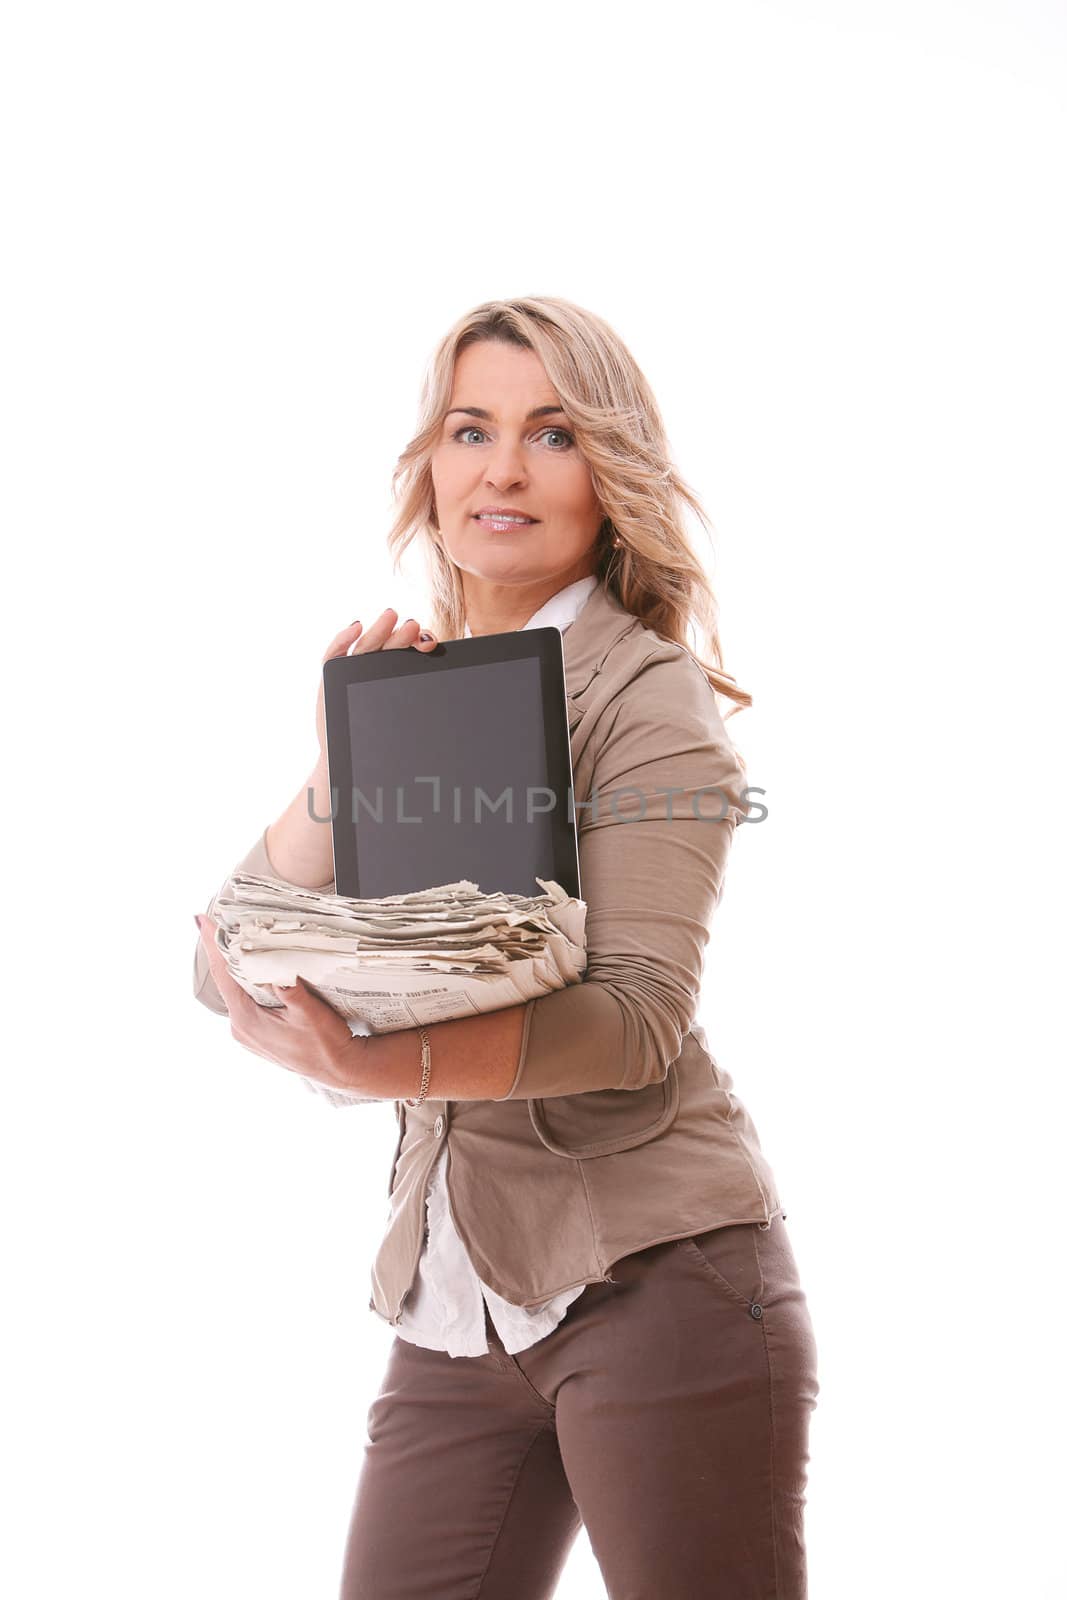 Mid aged woman in office suit with tablet pc and newspapers